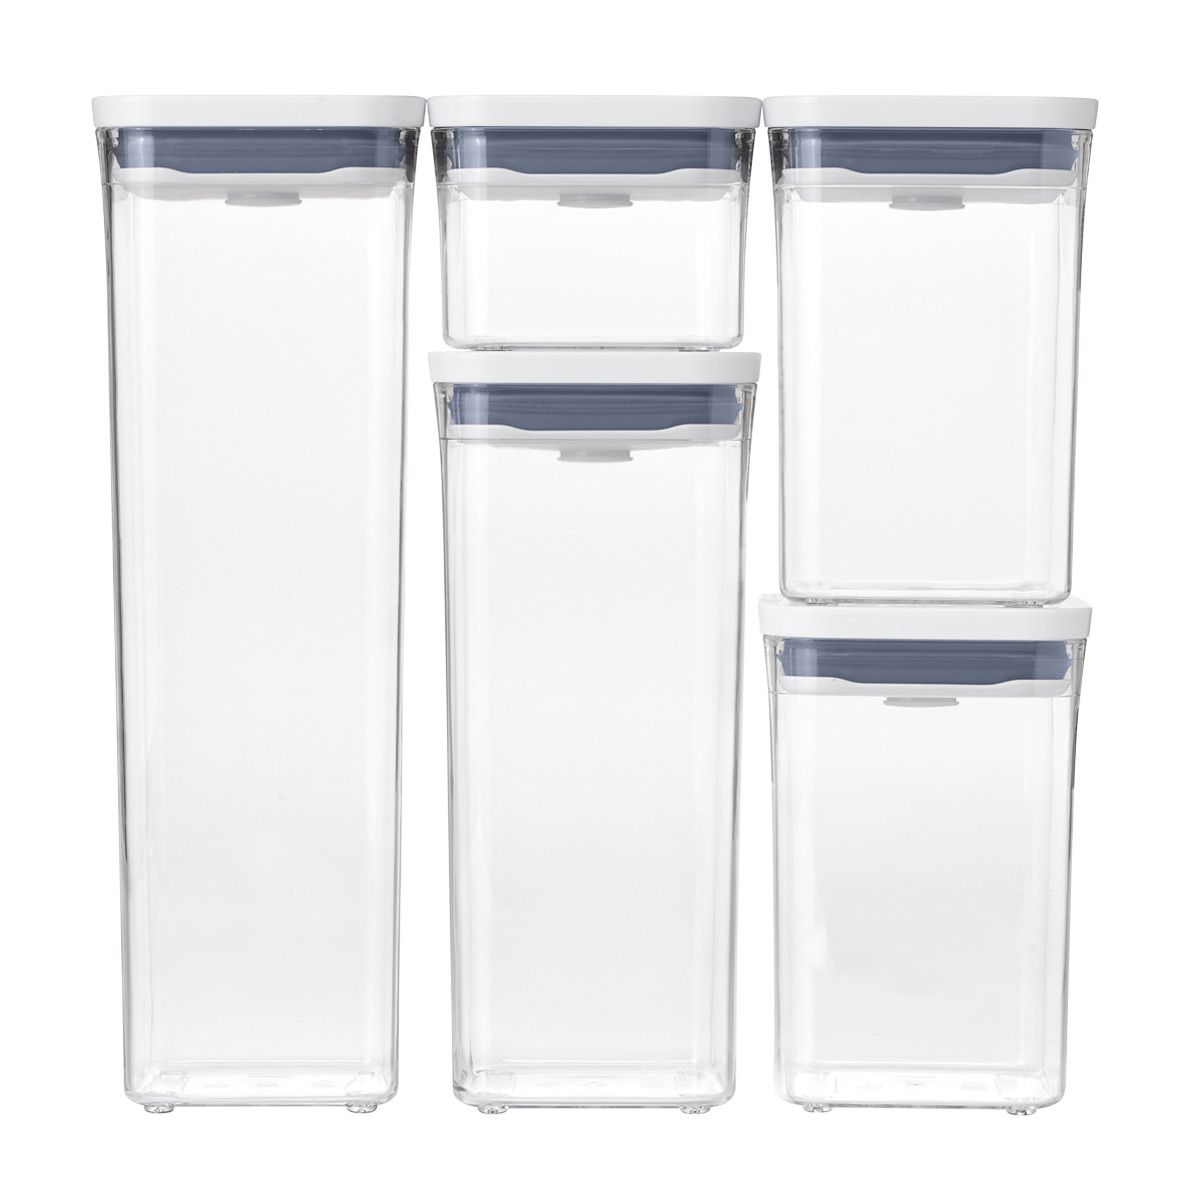 5-Piece POP Container Set | The Container Store